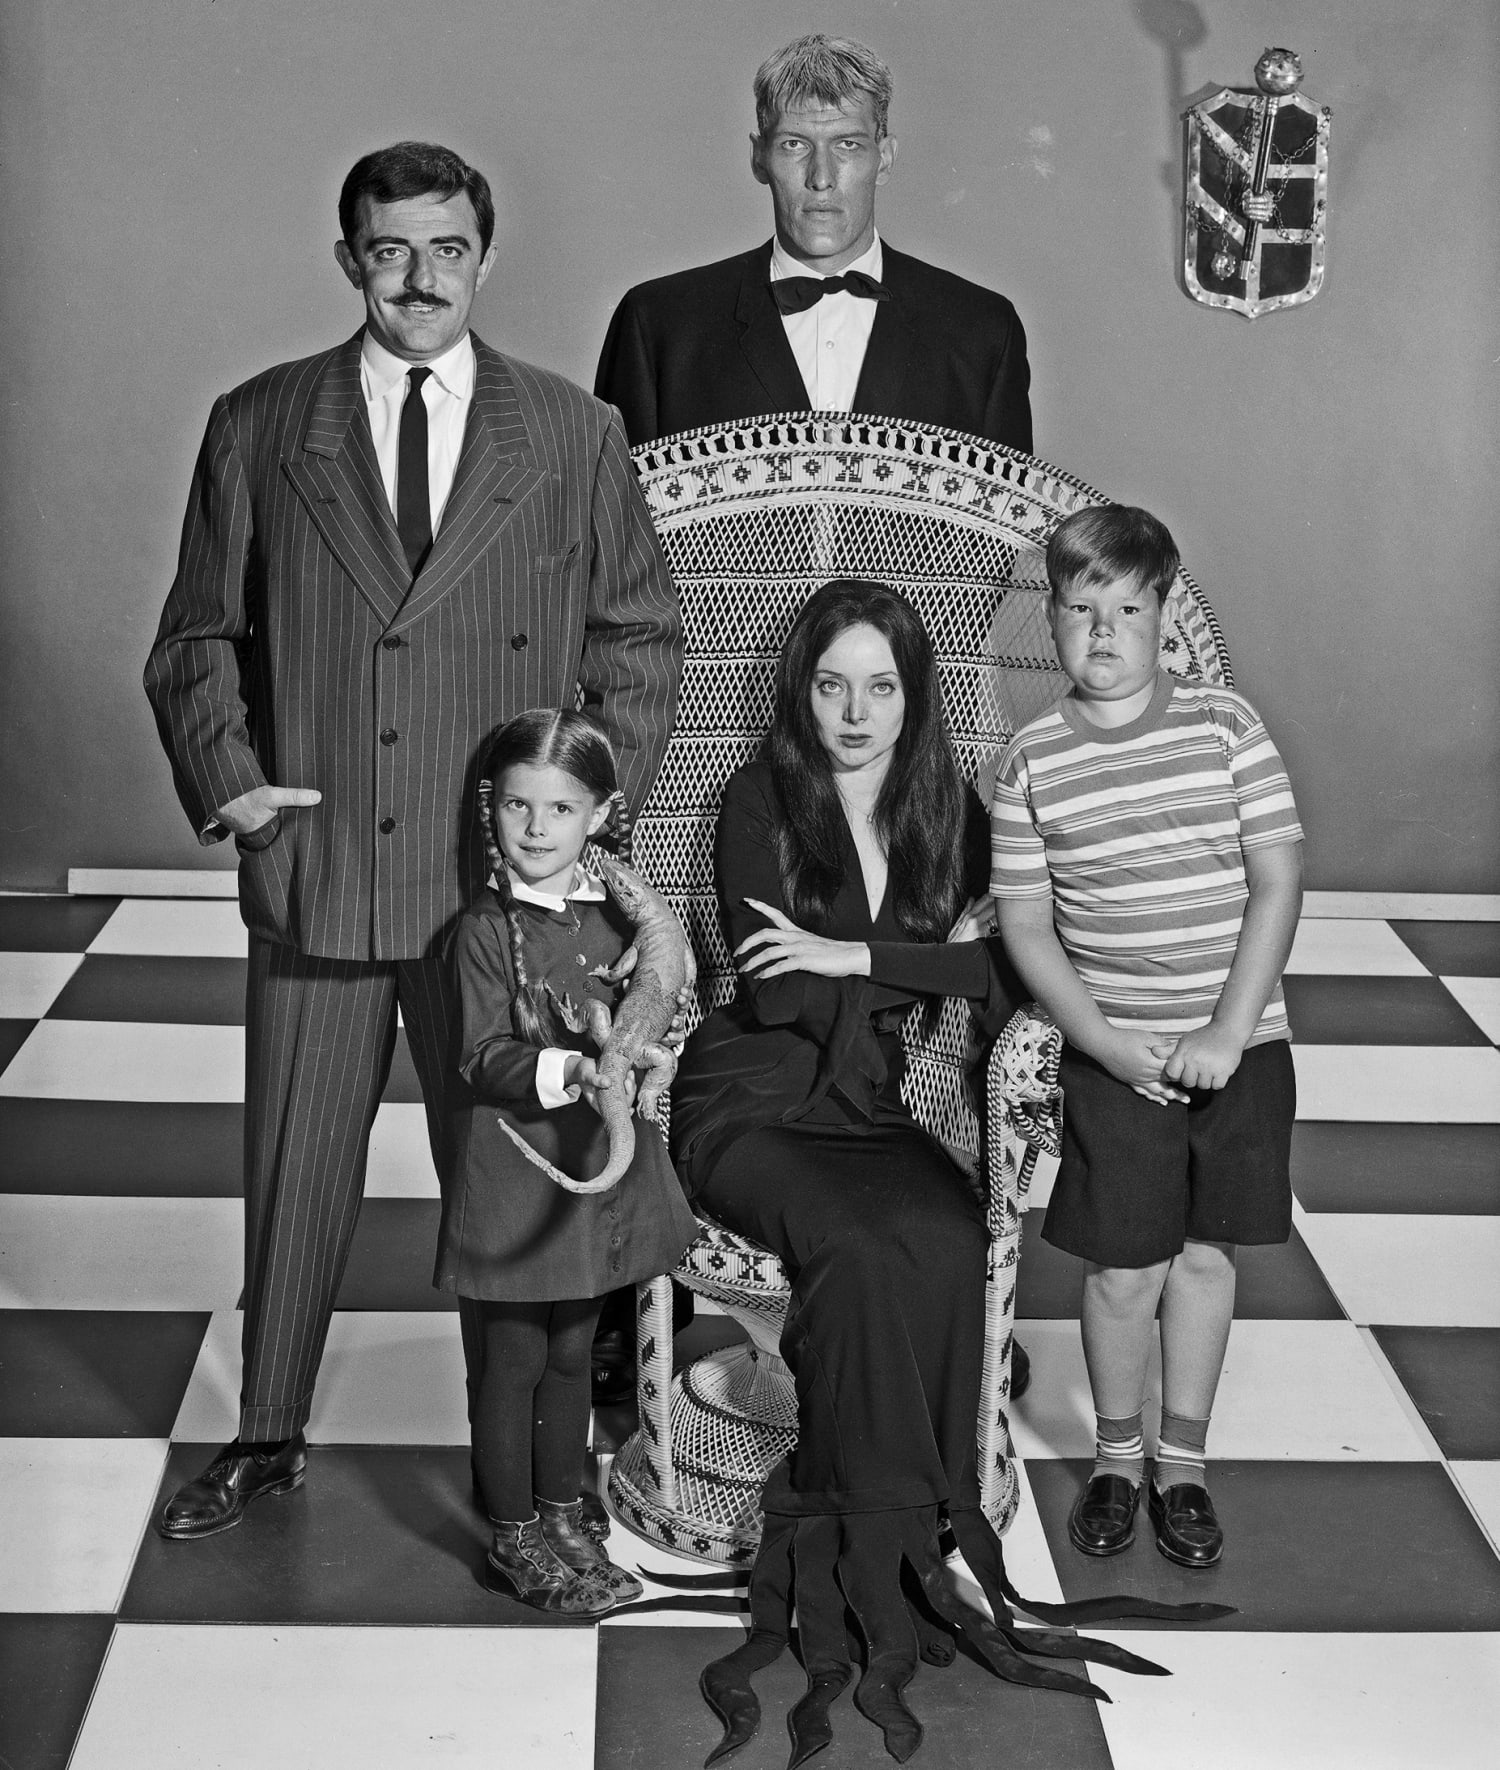 Lisa Loring, who played Wednesday in the original 'Addams Family' series,  dies at 64